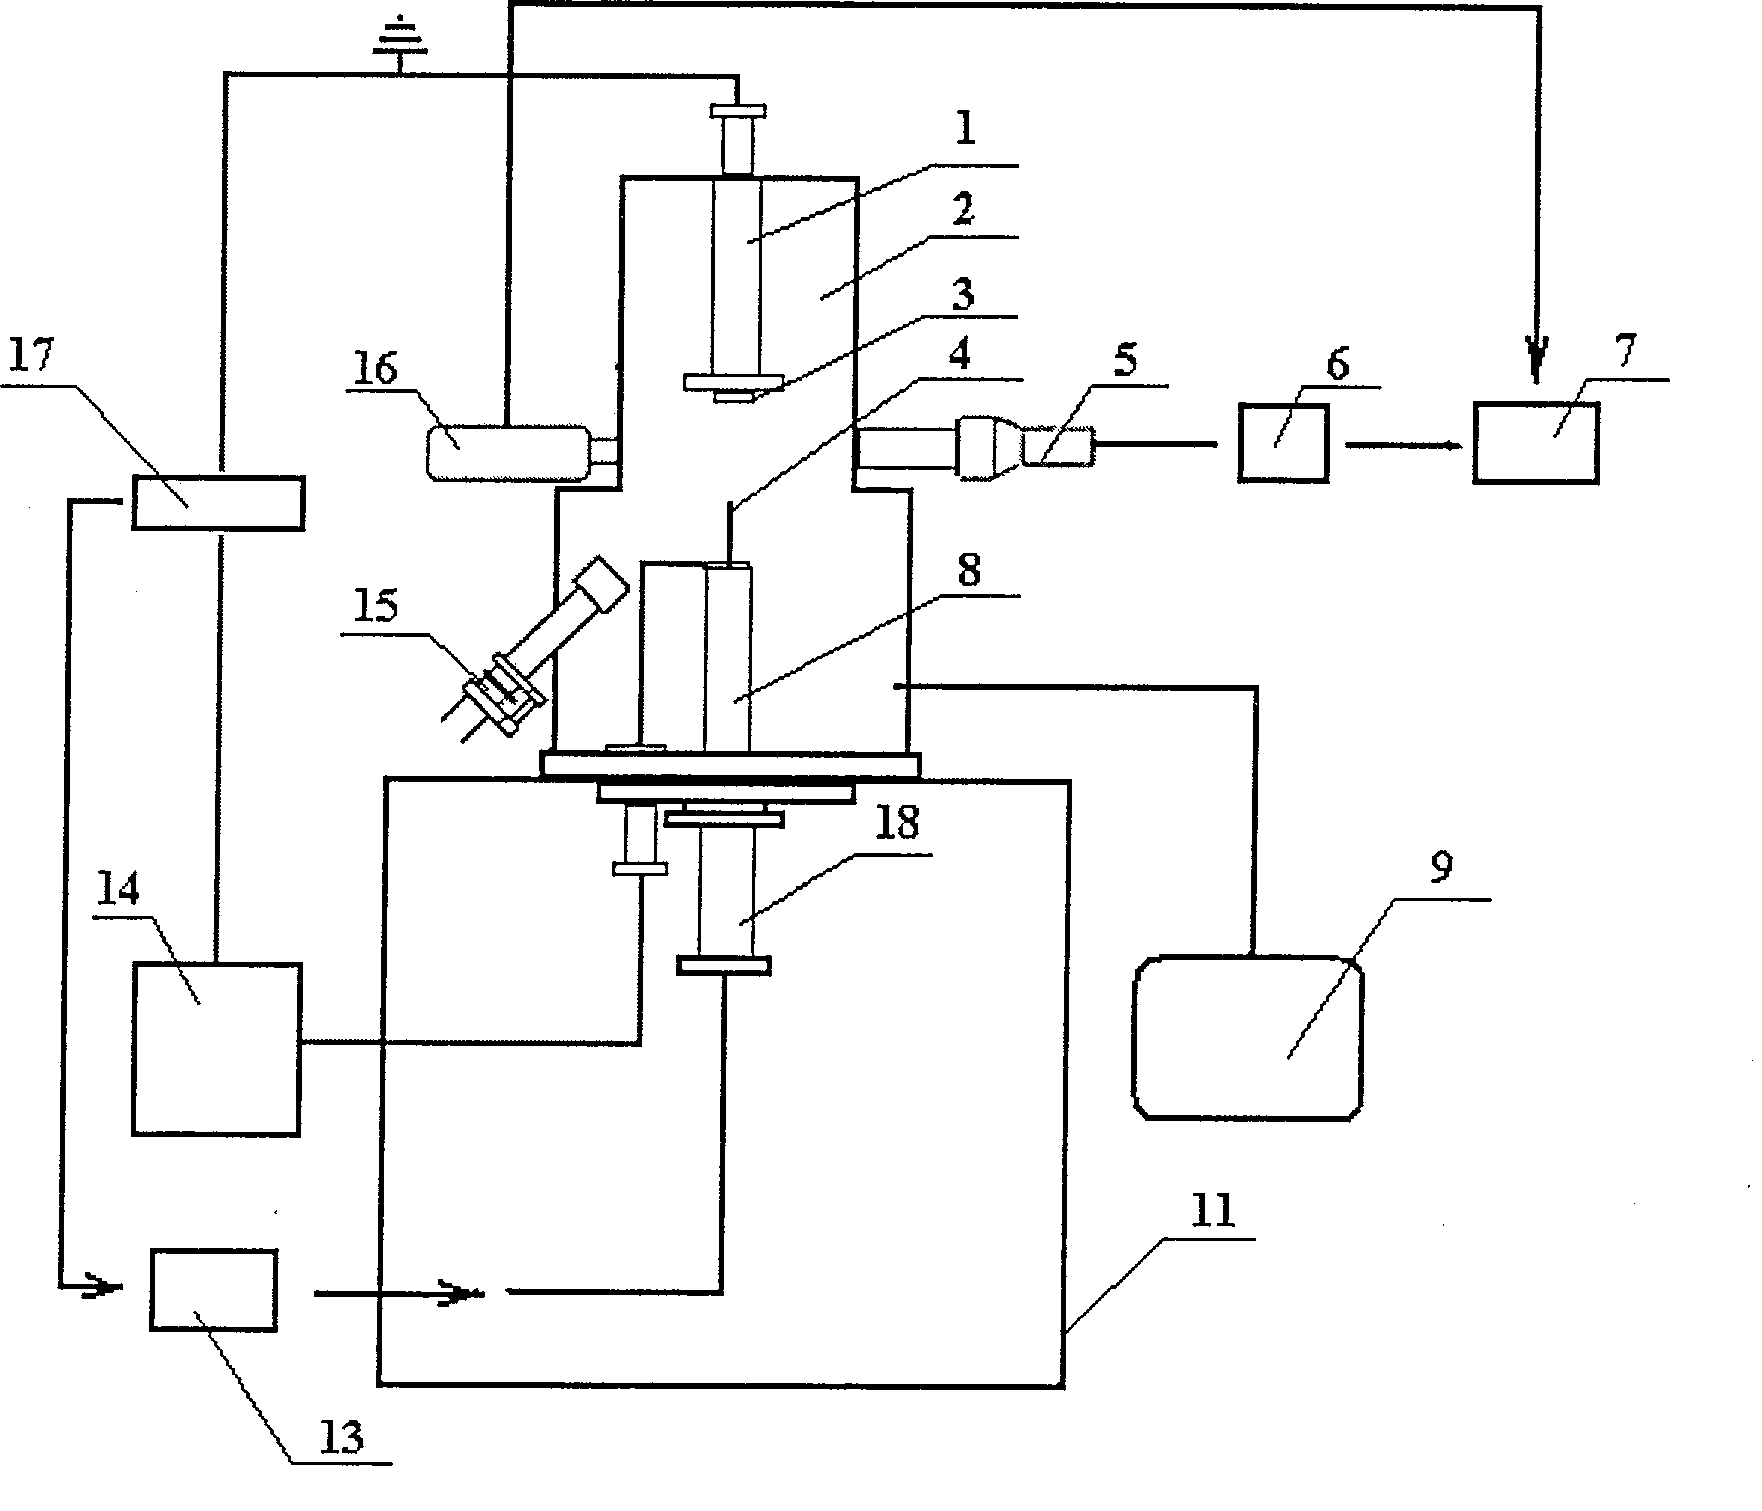 Test apparatus for breakdown strength of material